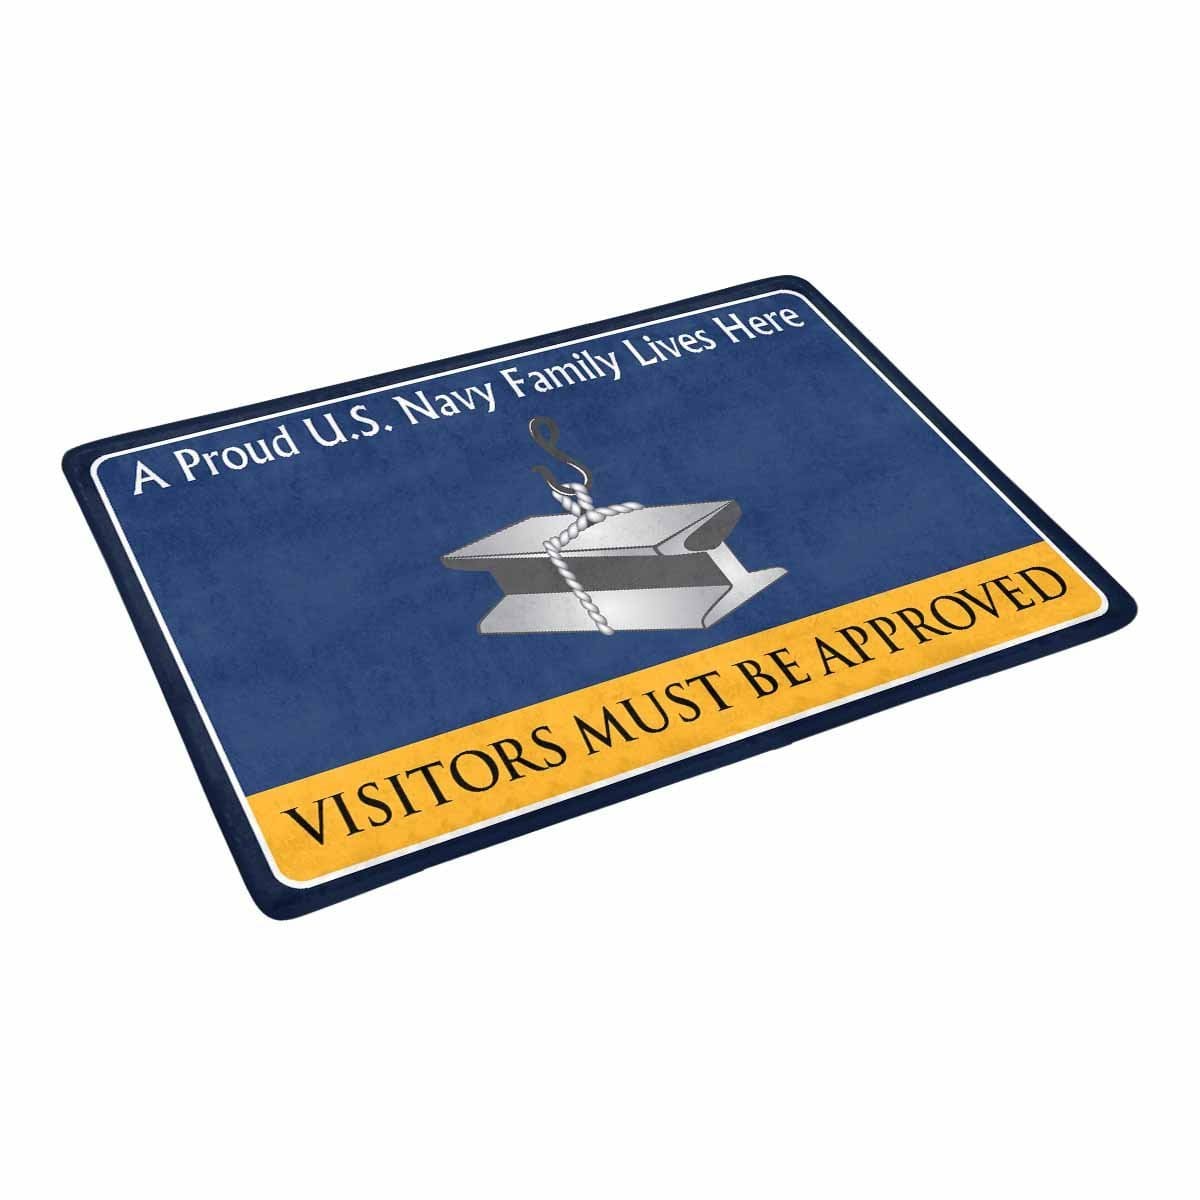 U.S Navy Steelworker Navy SW Family Doormat - Visitors must be approved (23,6 inches x 15,7 inches)-Doormat-Navy-Rate-Veterans Nation